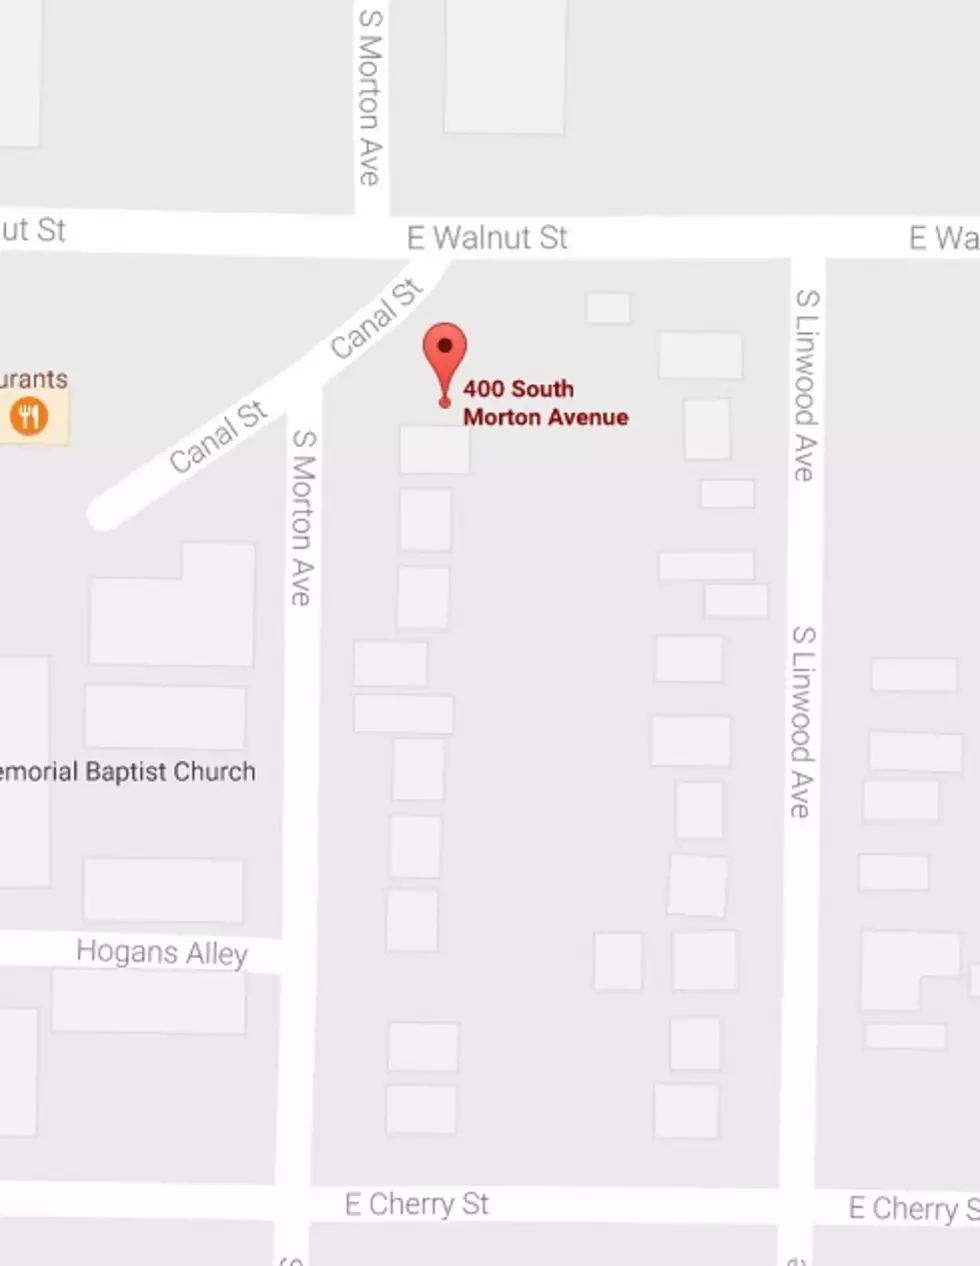 EPD Need Your Help With S. Morton Ave Shooting Investigation